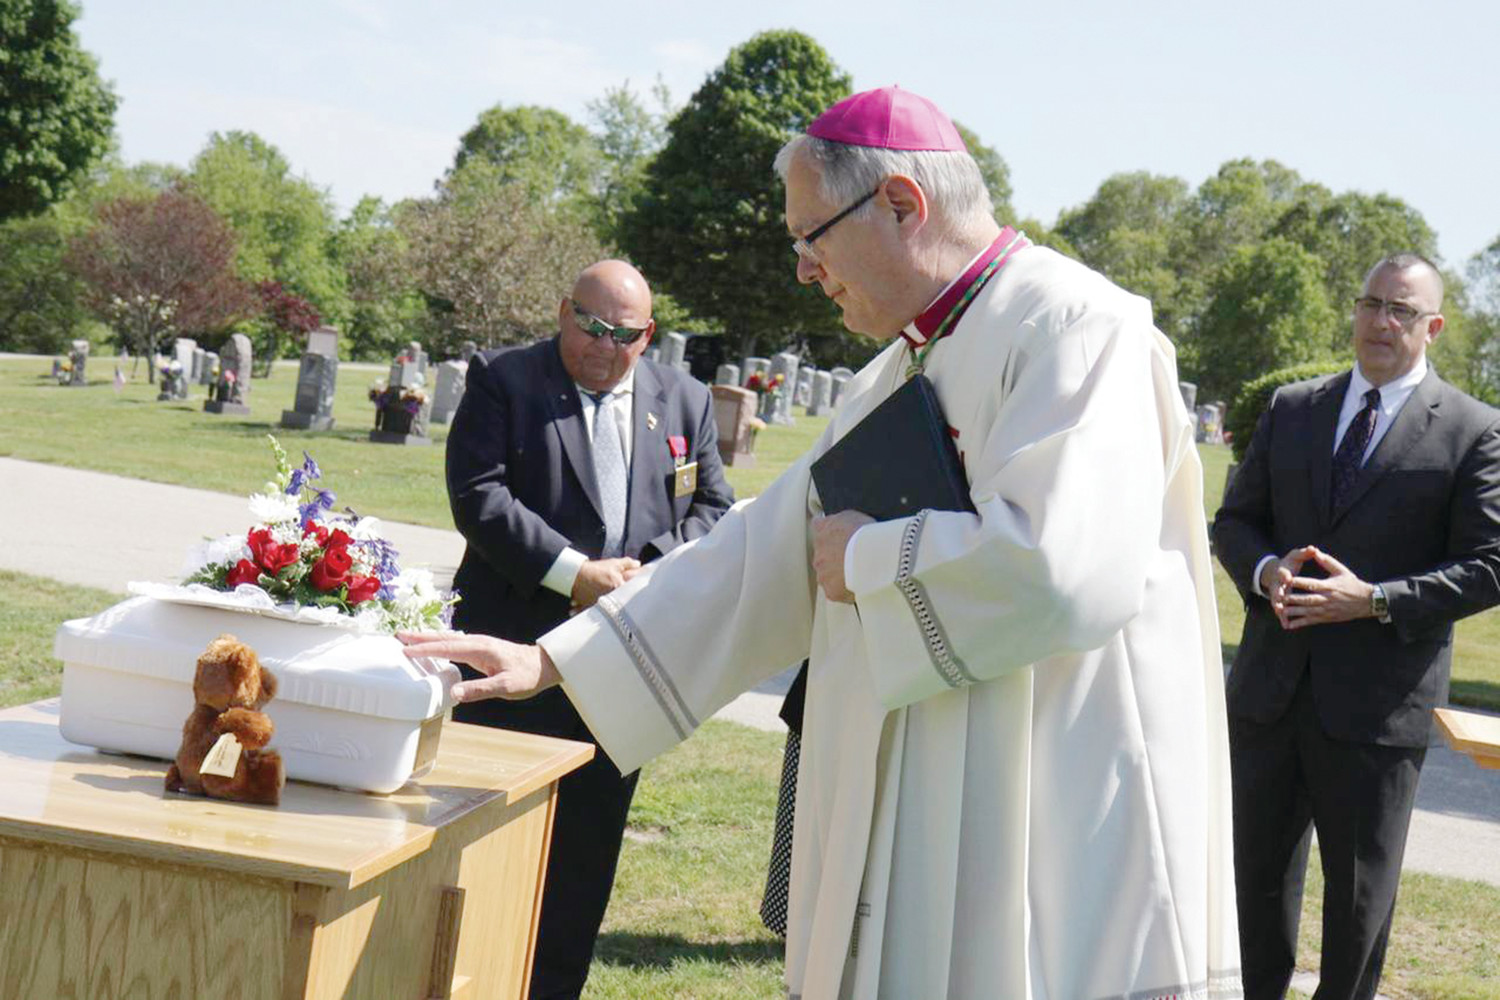 In June 2015 in a simple, but dignified ceremony in a section of Gate of Heaven Cemetery set aside for the repose of babies, Bishop Tobin presided over a Christian burial service for the unborn child he named “Francis,” fulfilling a commitment he made to officials five months before after a fetus was found floating amid the sewage at a nearby wastewater treatment facility. The tiny white casket, with “Baby Francis 2015” inscribed on a gold plaque affixed to one end, and flanked by flowers and a small teddy bear, rested upon a portable pine altar as the burial service was conducted.